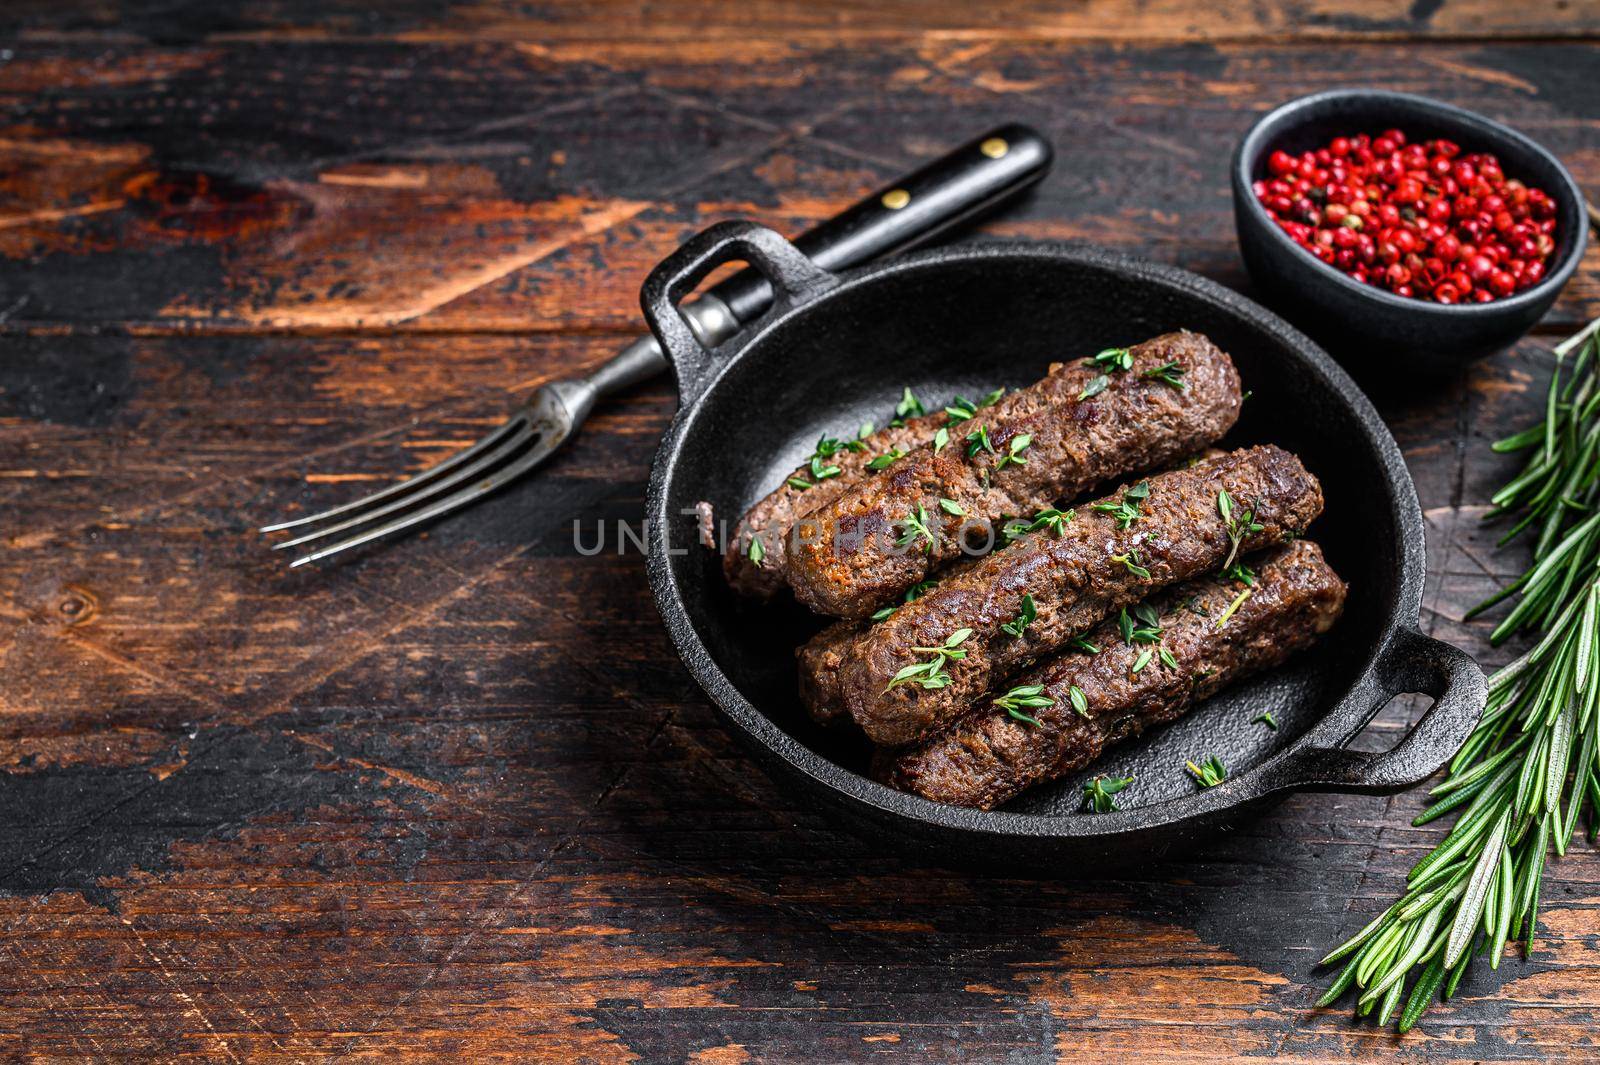 Grilled mince meat sausages in a pan. Dark wooden background. Top view. Copy space.